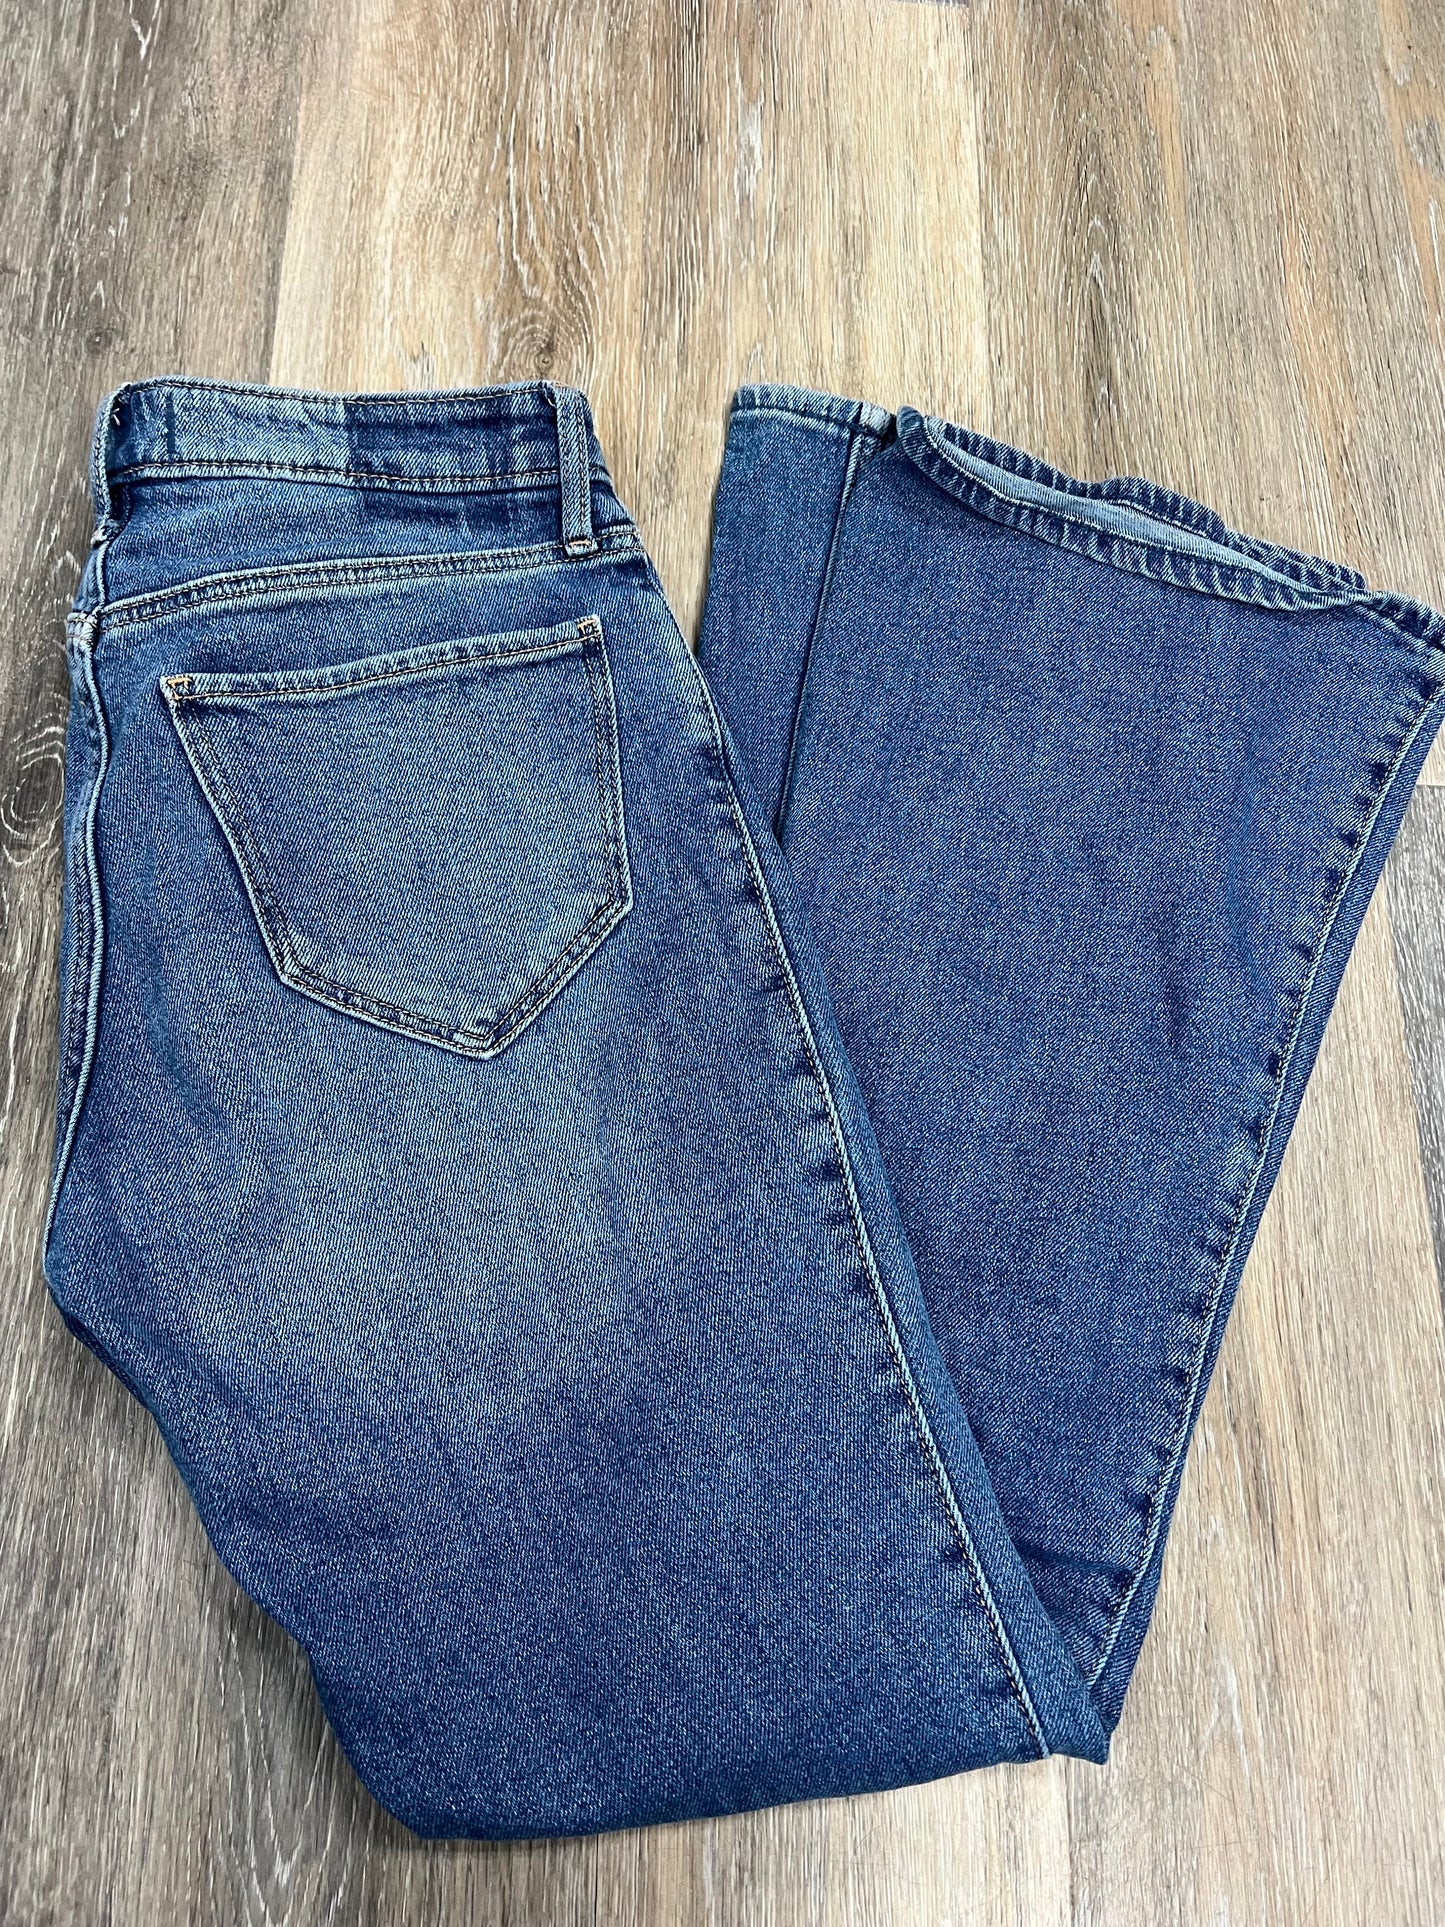 Jeans Flared By Abercrombie And Fitch  Size: 4/27